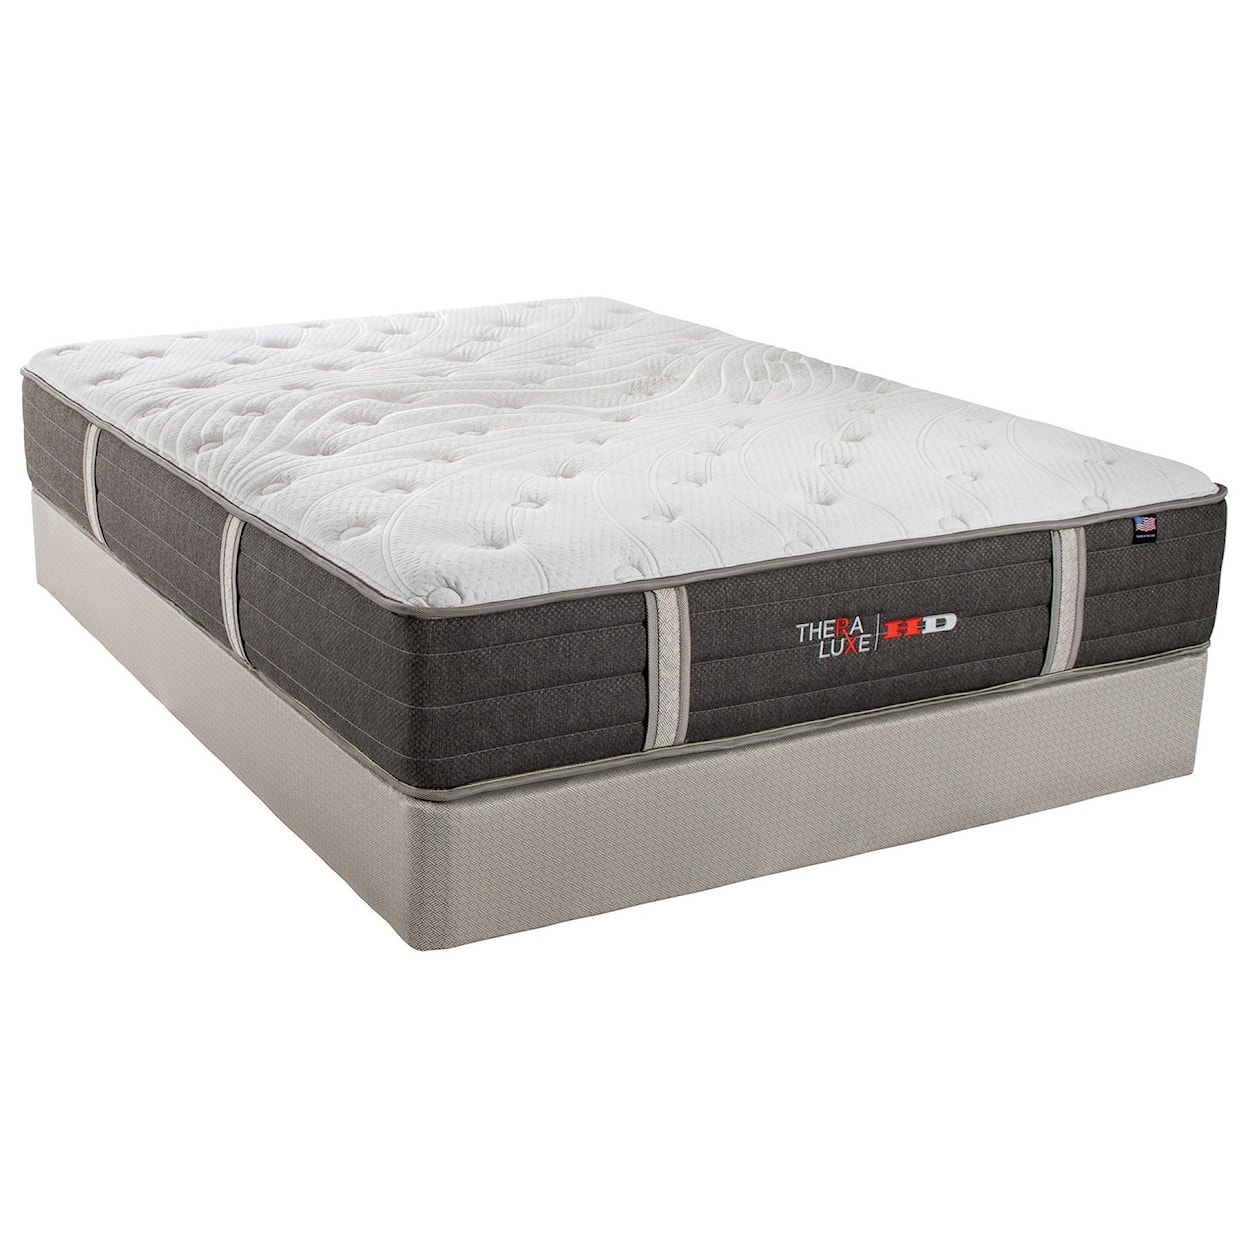 Therapedic Theraluxe Aspen Queen Firm Pocketed Coil Mattress Set